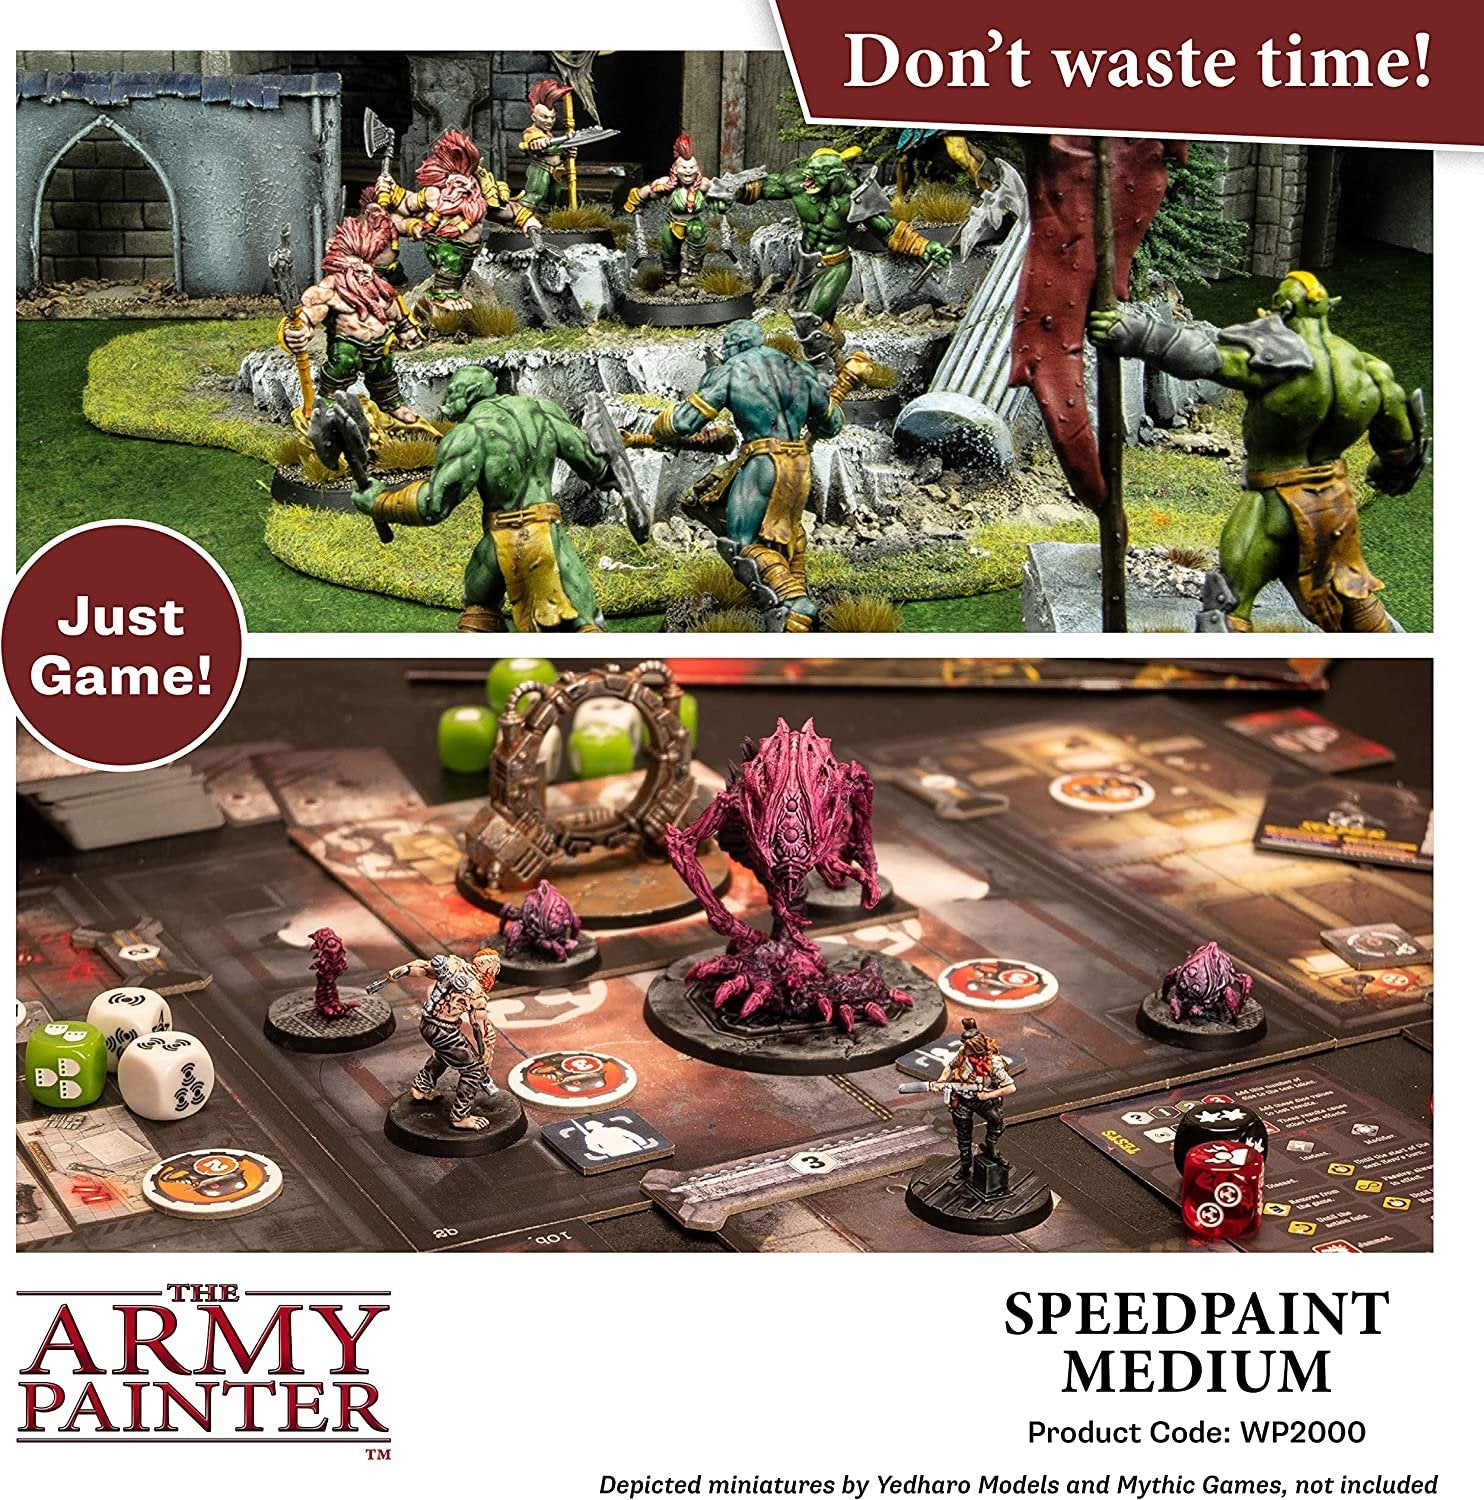 The Army Painter - Speedpaint Complete Set 2.0 – Wargames Delivered